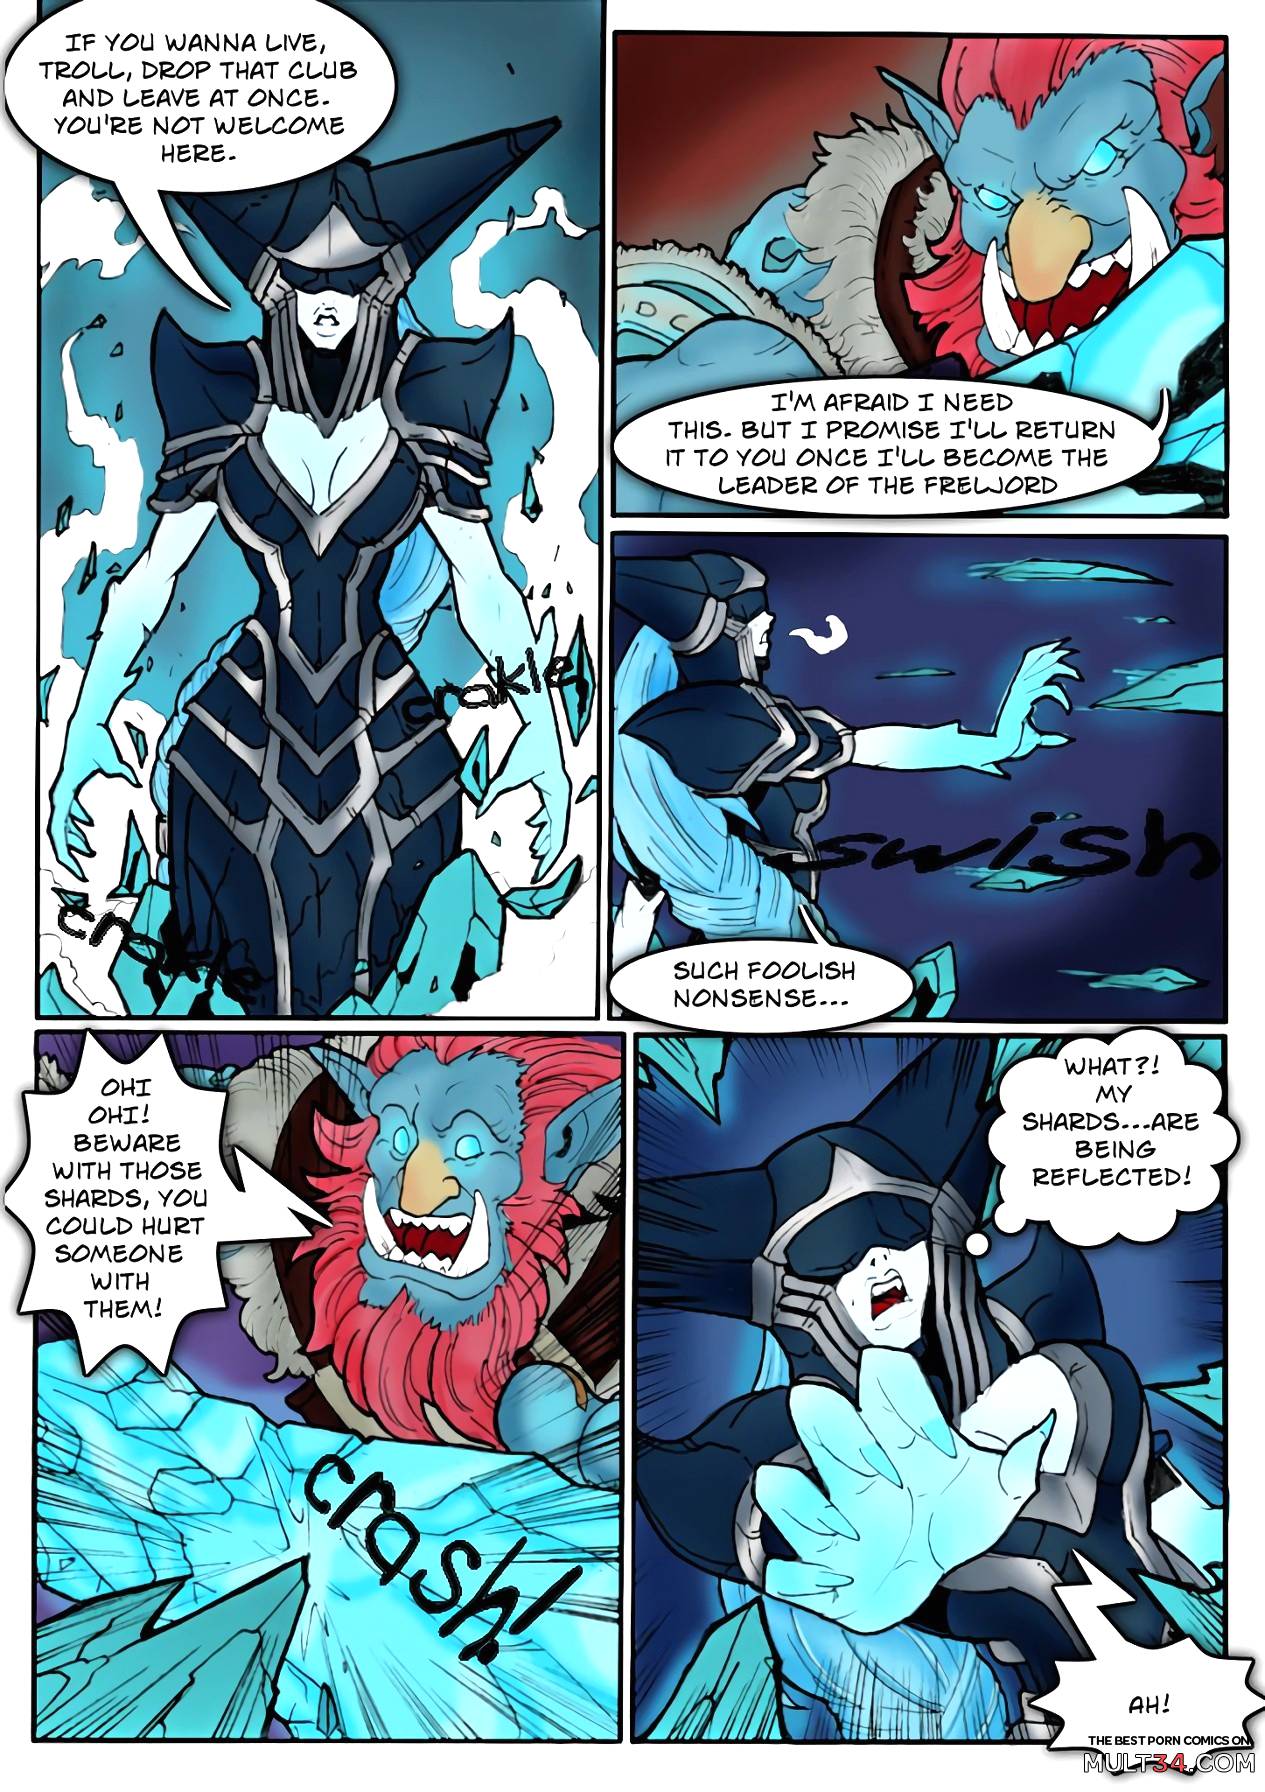 Tales of the Troll King ch. 1 - 3 ] [Colorized] page 4